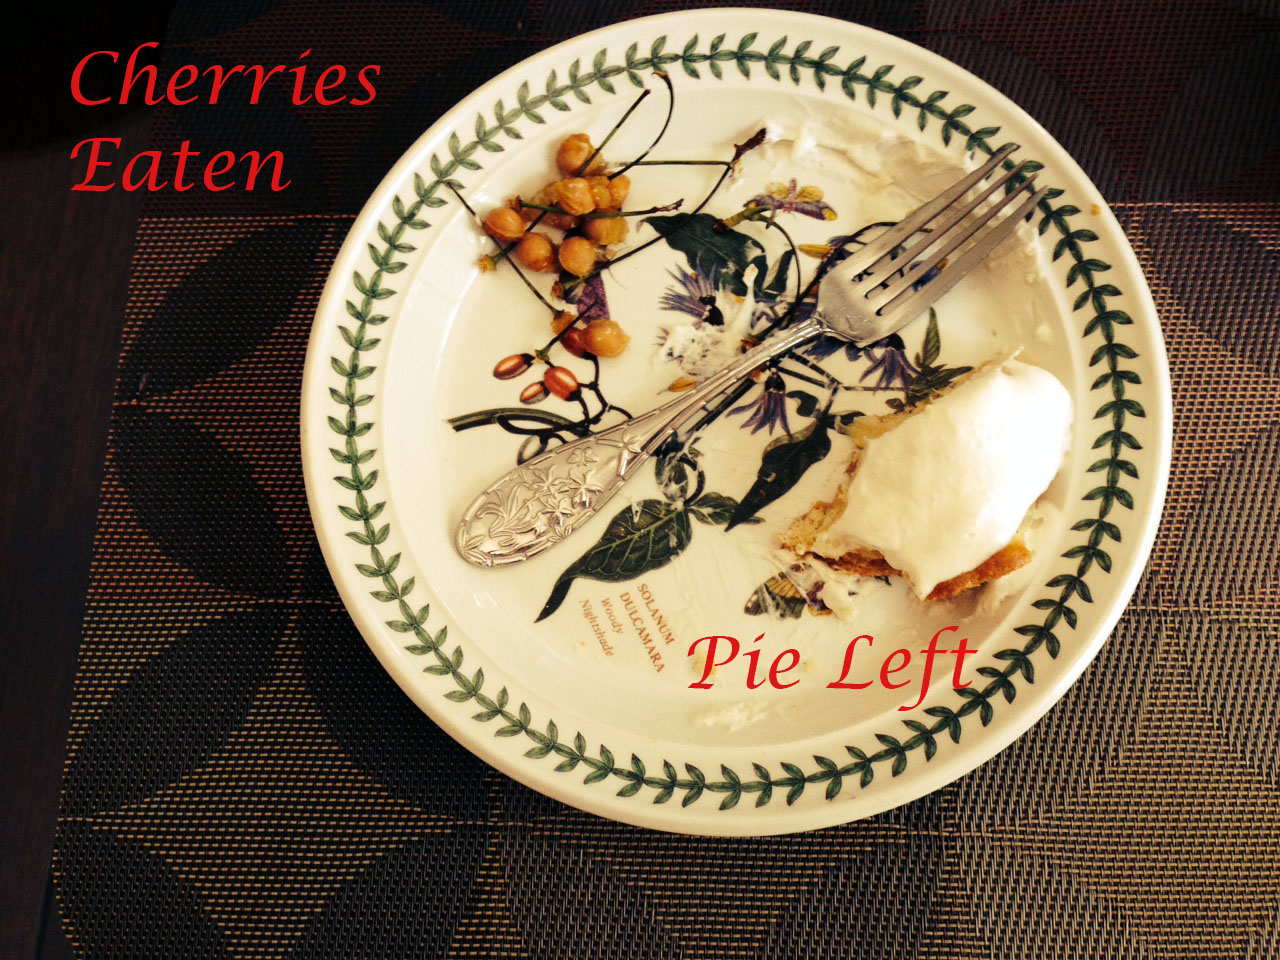 Plate with cherry pits and part of a pie slice